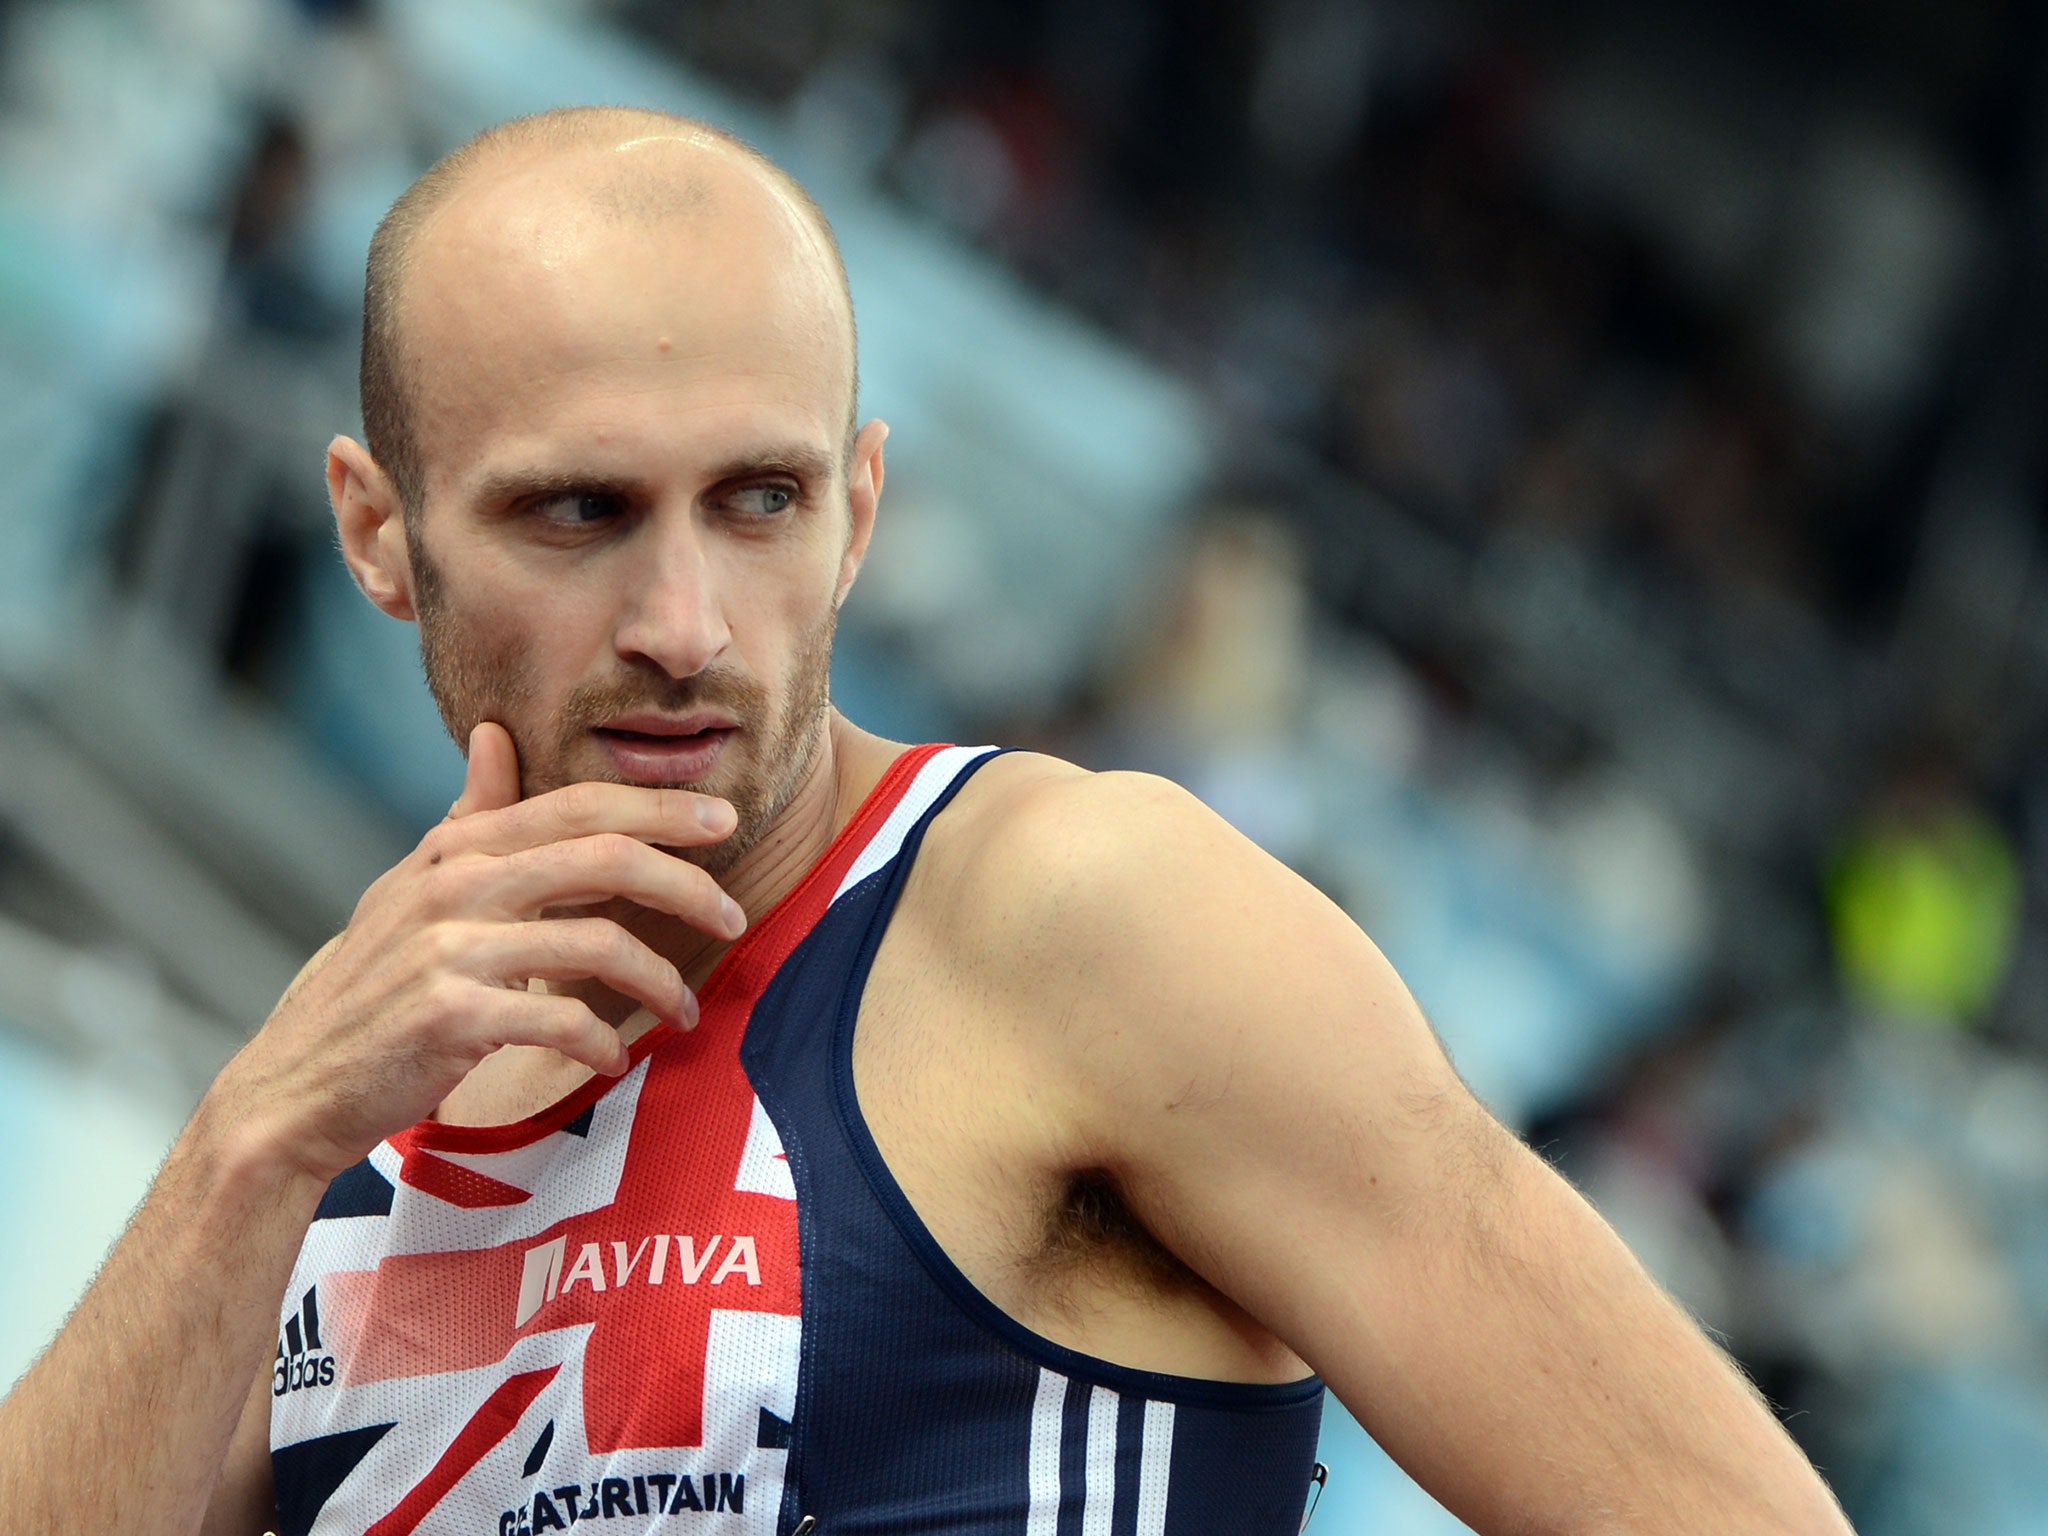 Britain's Gareth Warburton reacts after the men's 800m qualifications at the 2012 European Athletics Championships at the Olympic Stadium in Helsinki